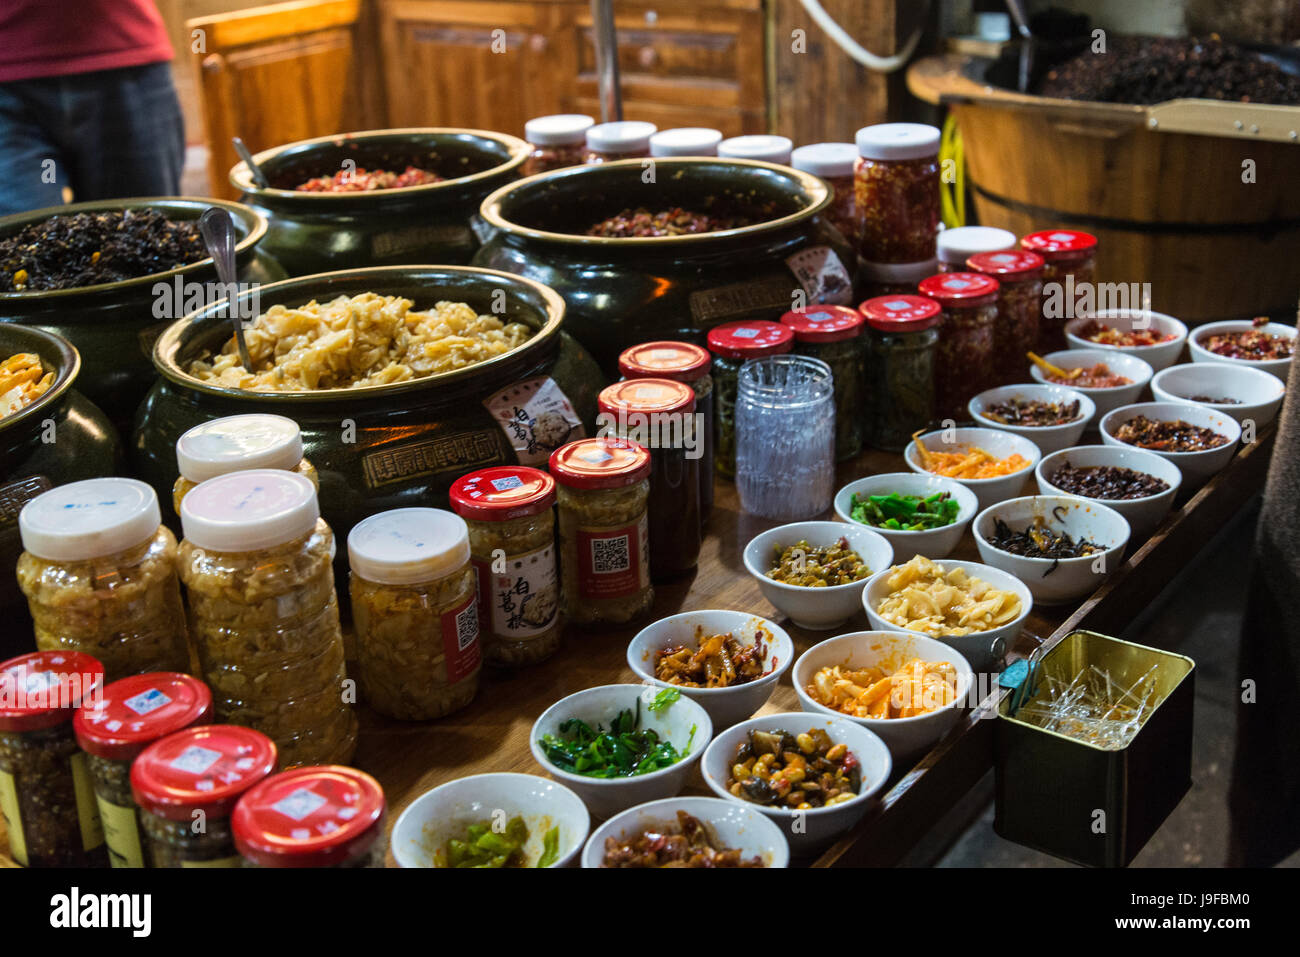 Local food delicacies sold in the street,  Tunxi Old Street, traditional shopping hub, Huangshan, Anhui province, China Stock Photo